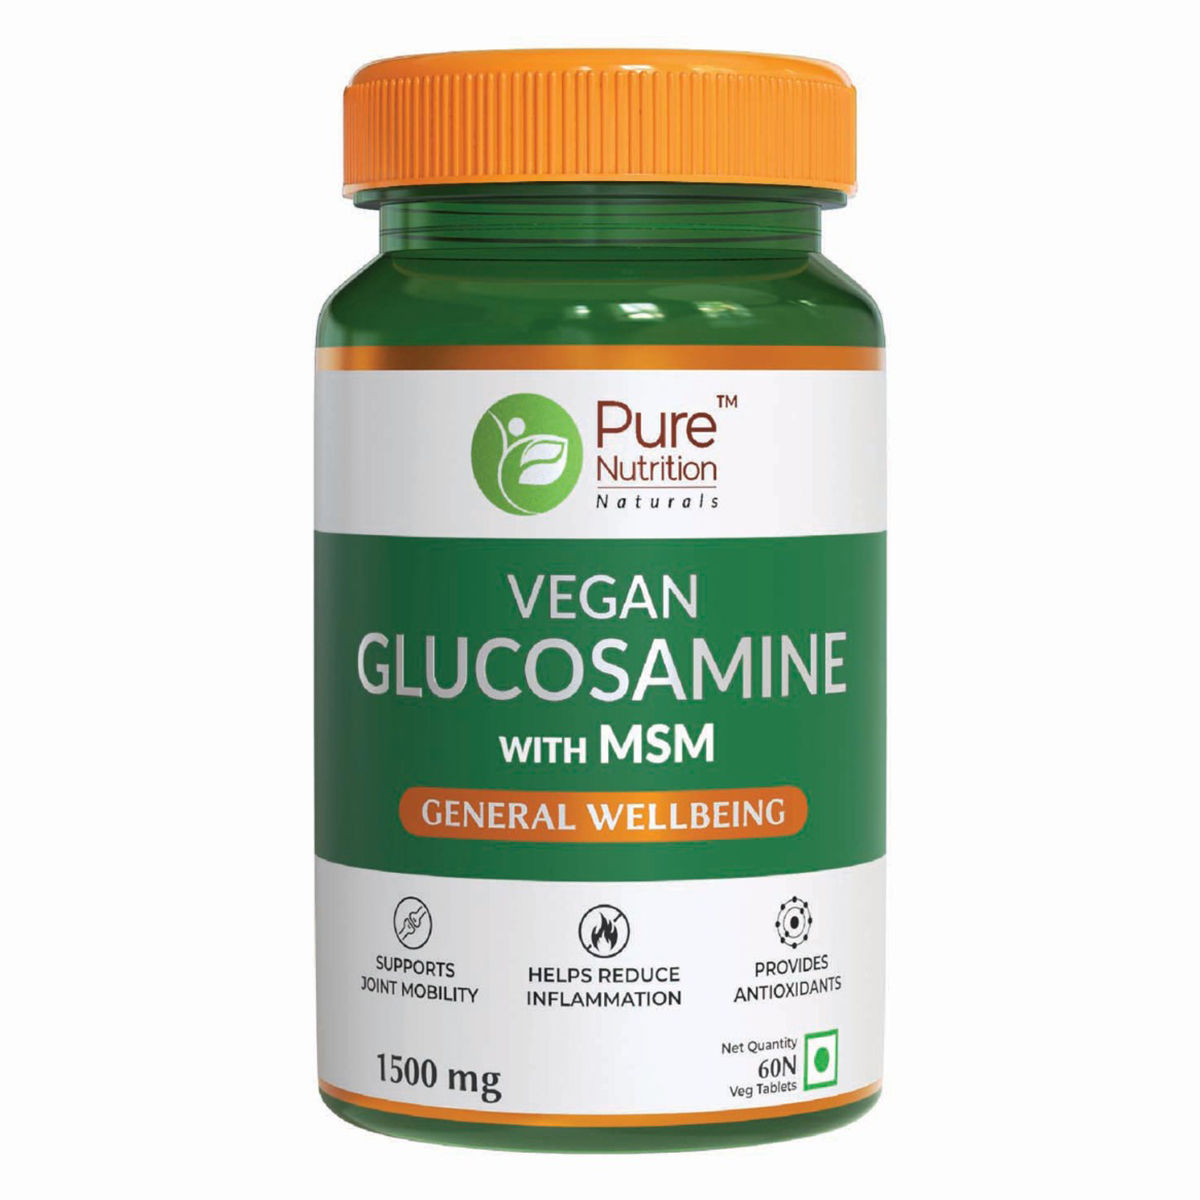 Buy Pure Nutrition Vegan Glucosamine with MSM 1500 mg, 60 Tablets Online